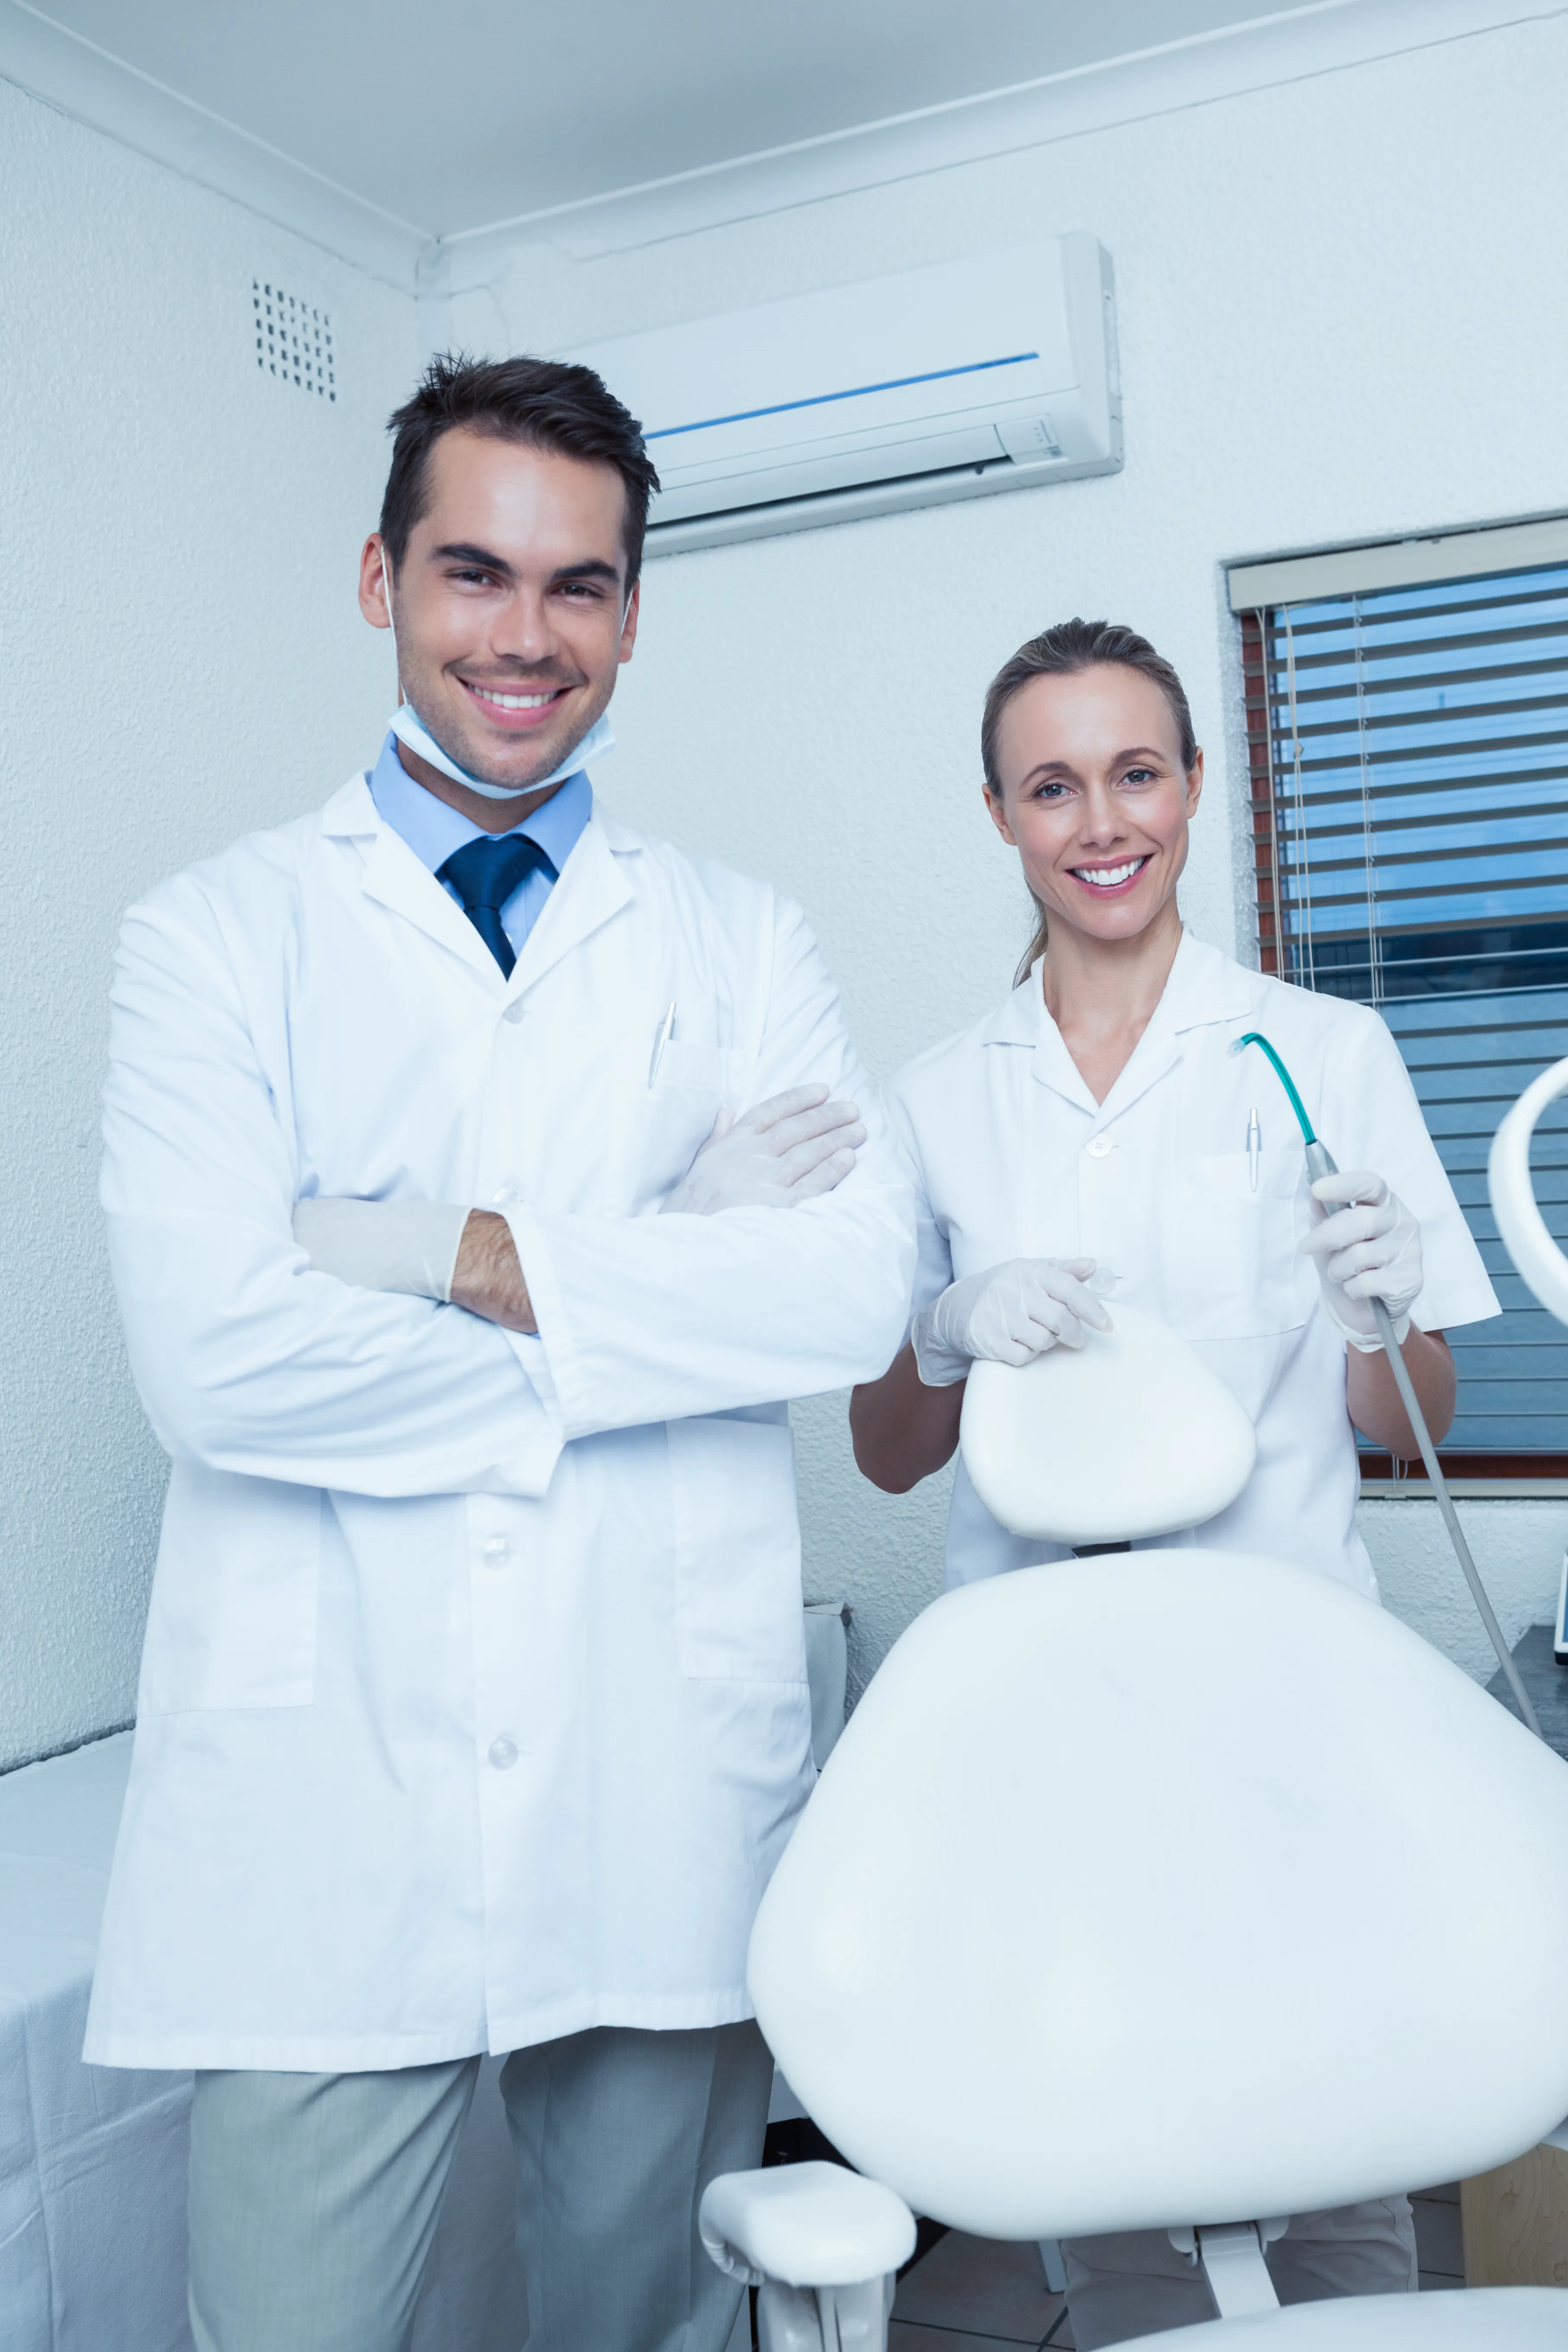 Oral Surgery Staffing Values